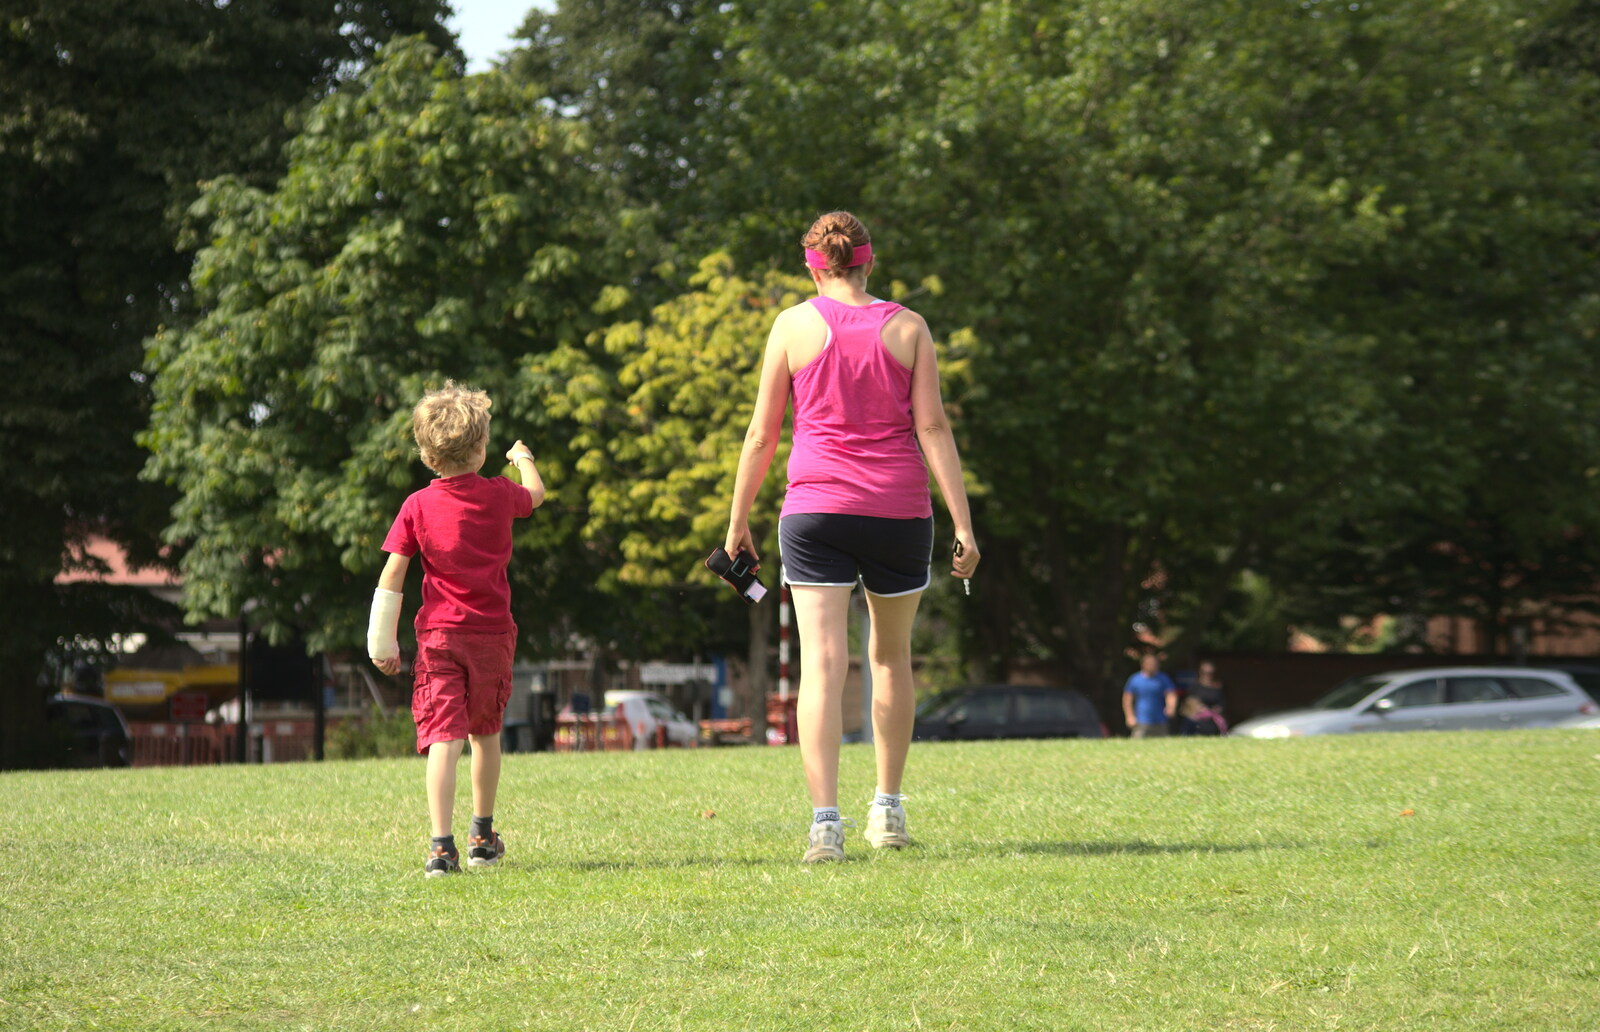 Fred and Isobel walk back to the car park from A Race For Life, The Park, Diss, Norfolk - 16th August 2015